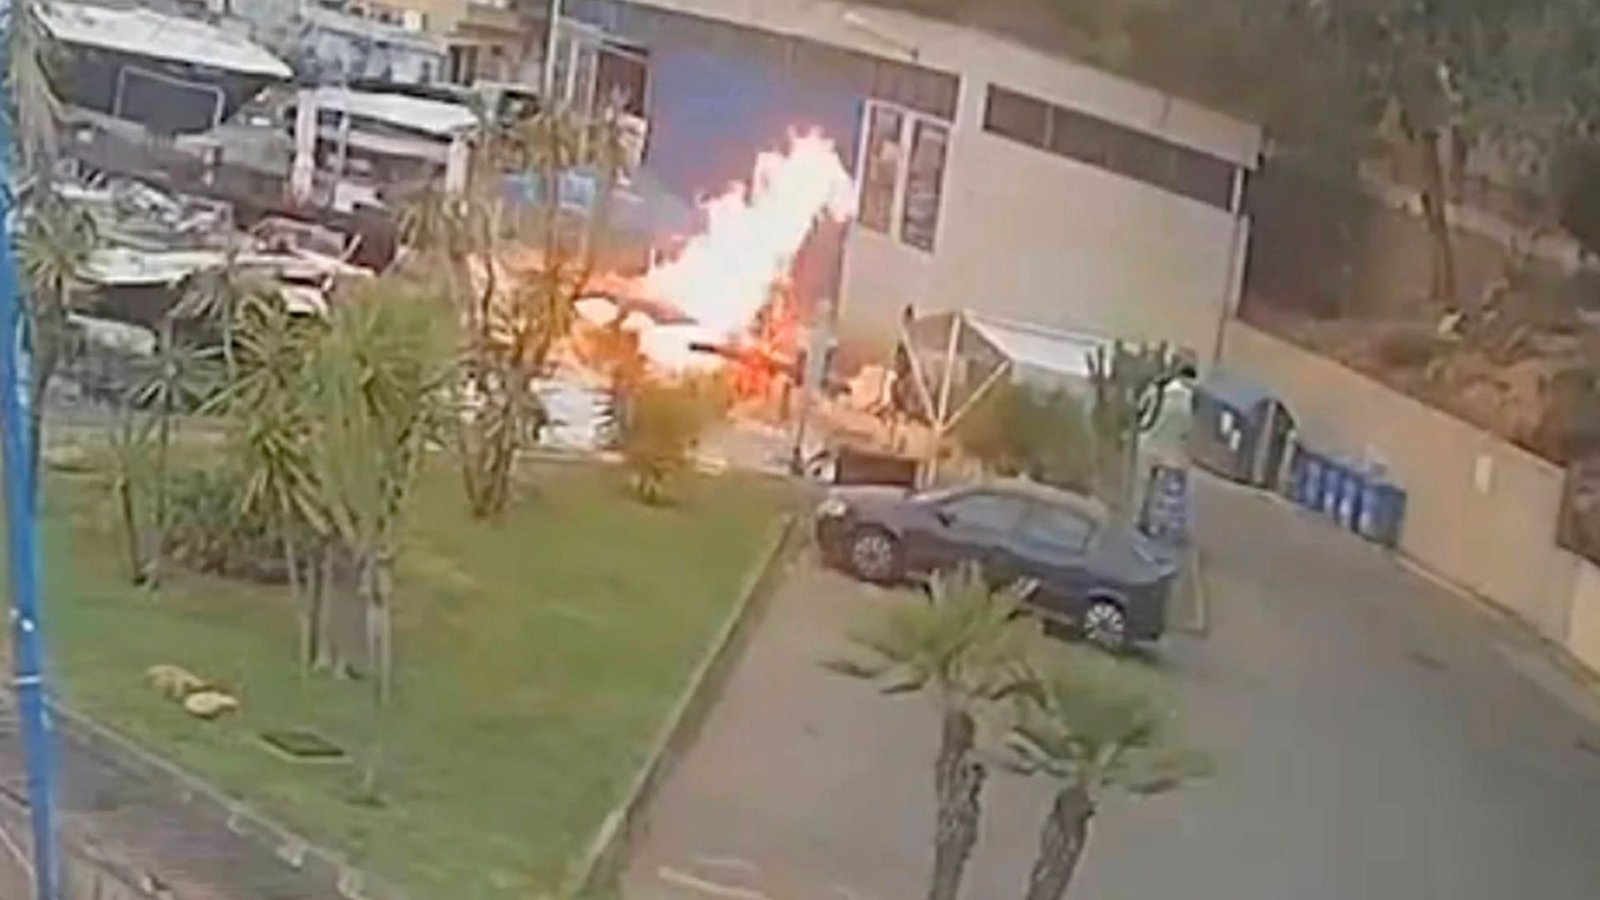 Moment boat EXPLODES in Costa Blanca port injuring Brit tourist, 37, and two others in fireball blast